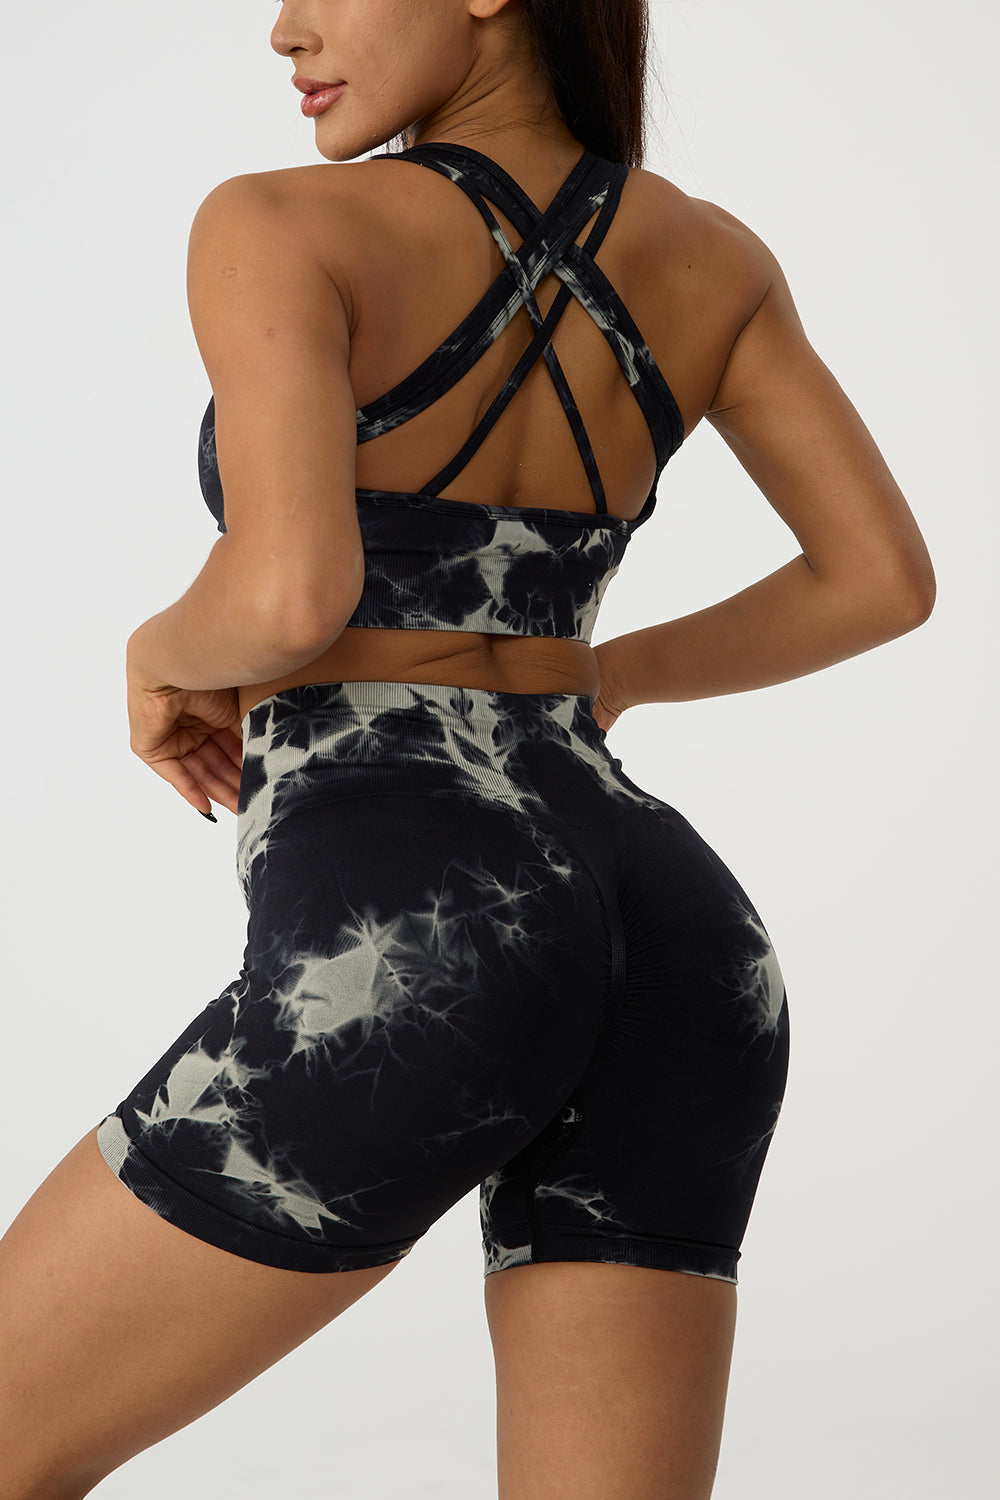 Crisscross Printed Tank and Shorts Active Set - Active Set - FITGGINS